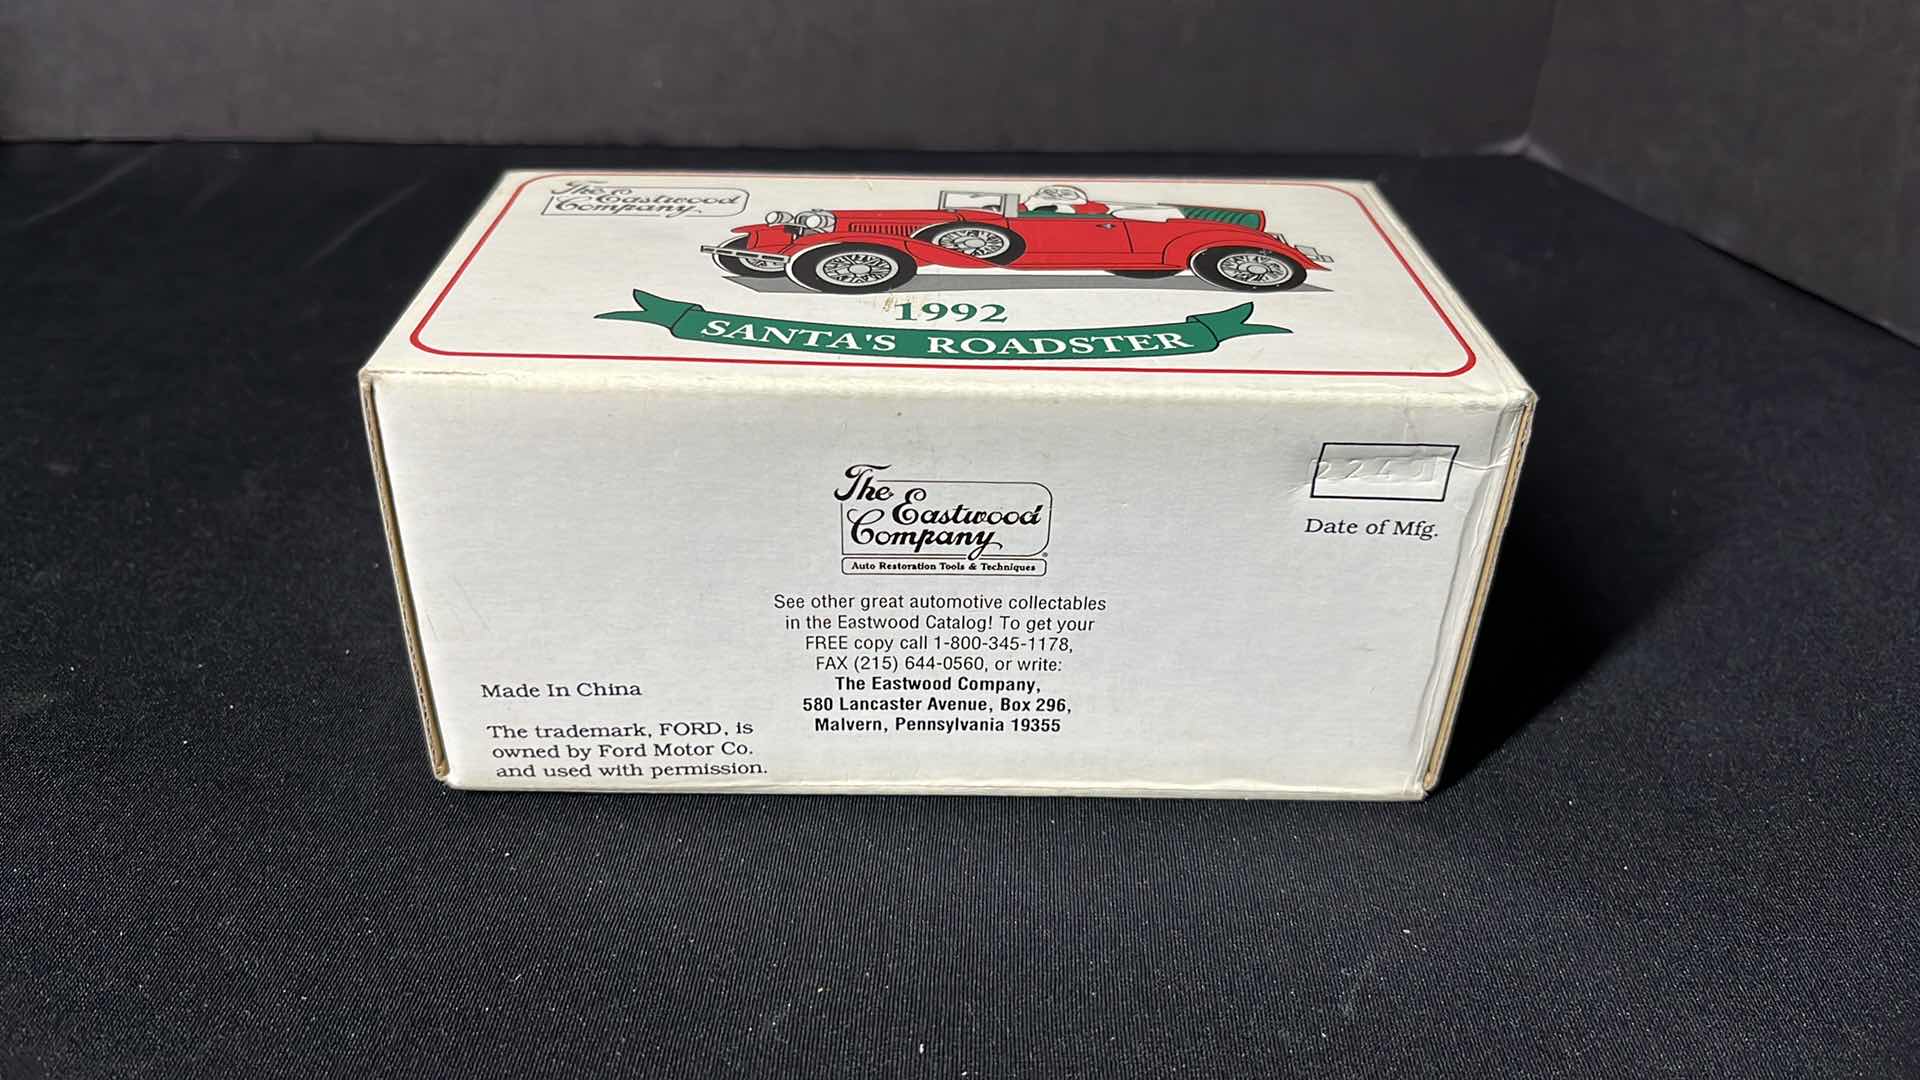 Photo 11 of THE EASTWOOD COMPANY DIE-CAST METAL GORD MODEL A 1992 SANTA’S ROADSTER LOCKING COIN BANK W KEY (STOCK #1928)